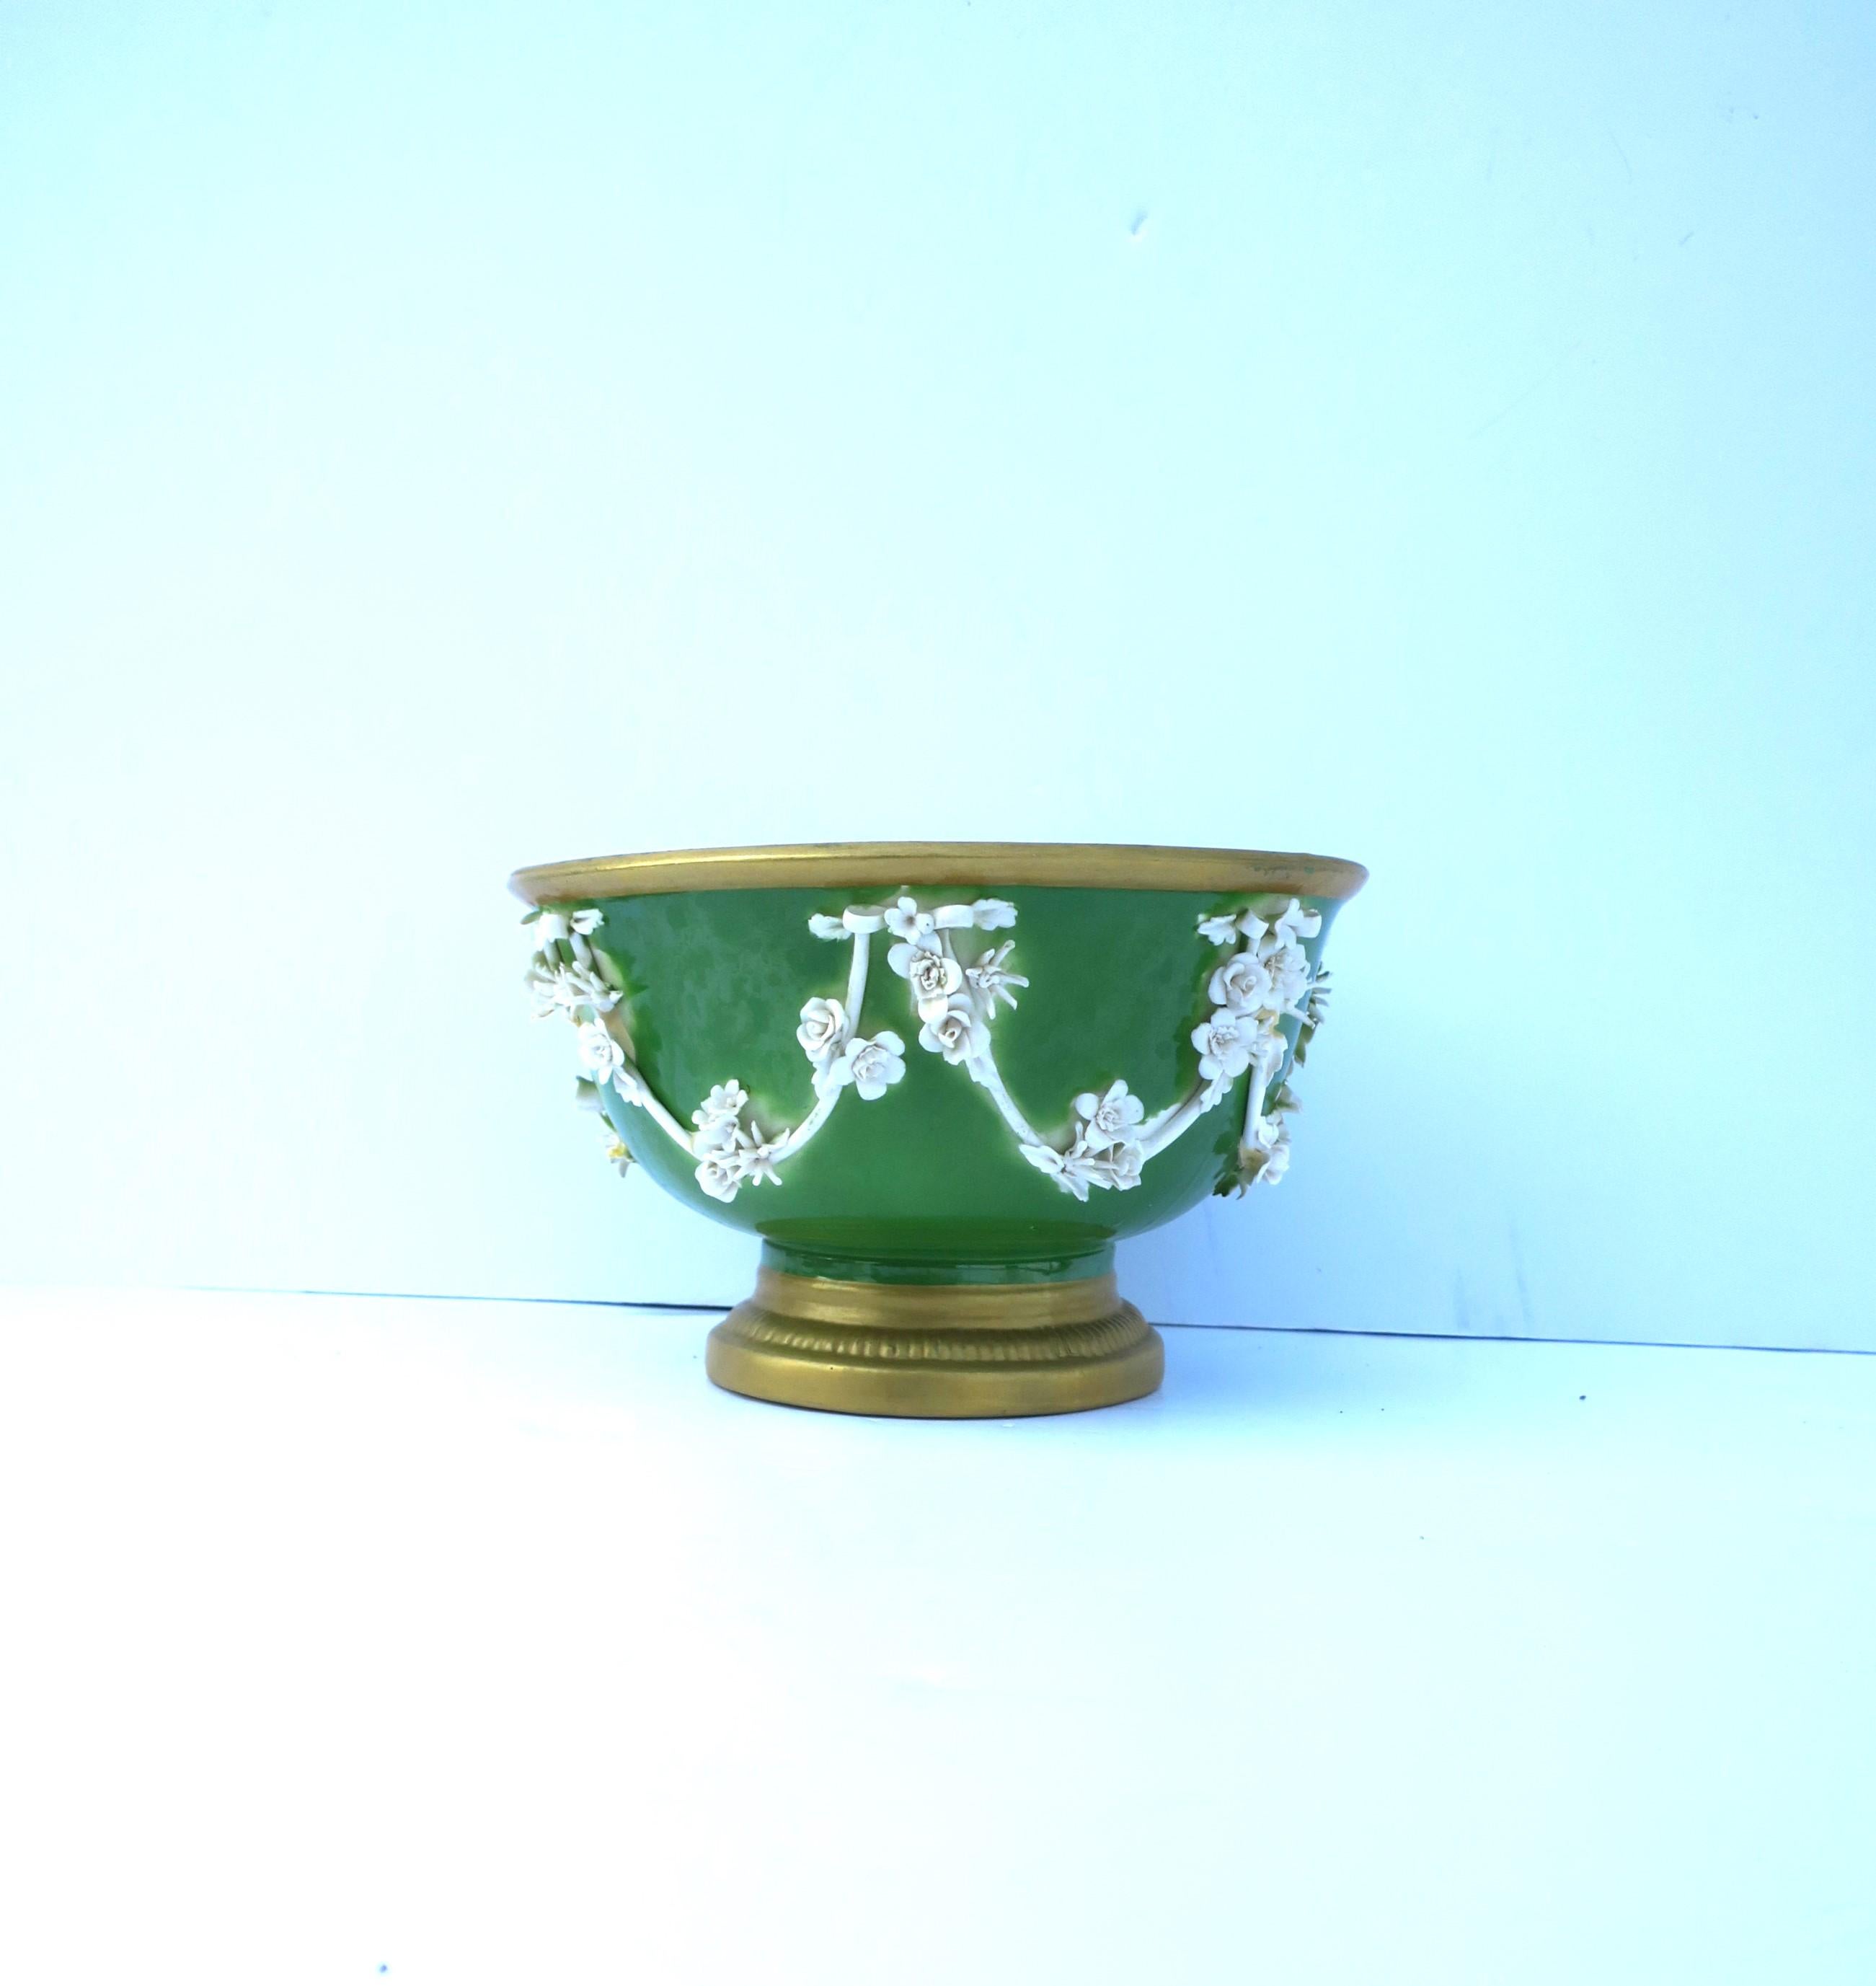 Italian Porcelain Footed Bowl Urn Neoclassical Style by Mottahedeh, 20th Century For Sale 3